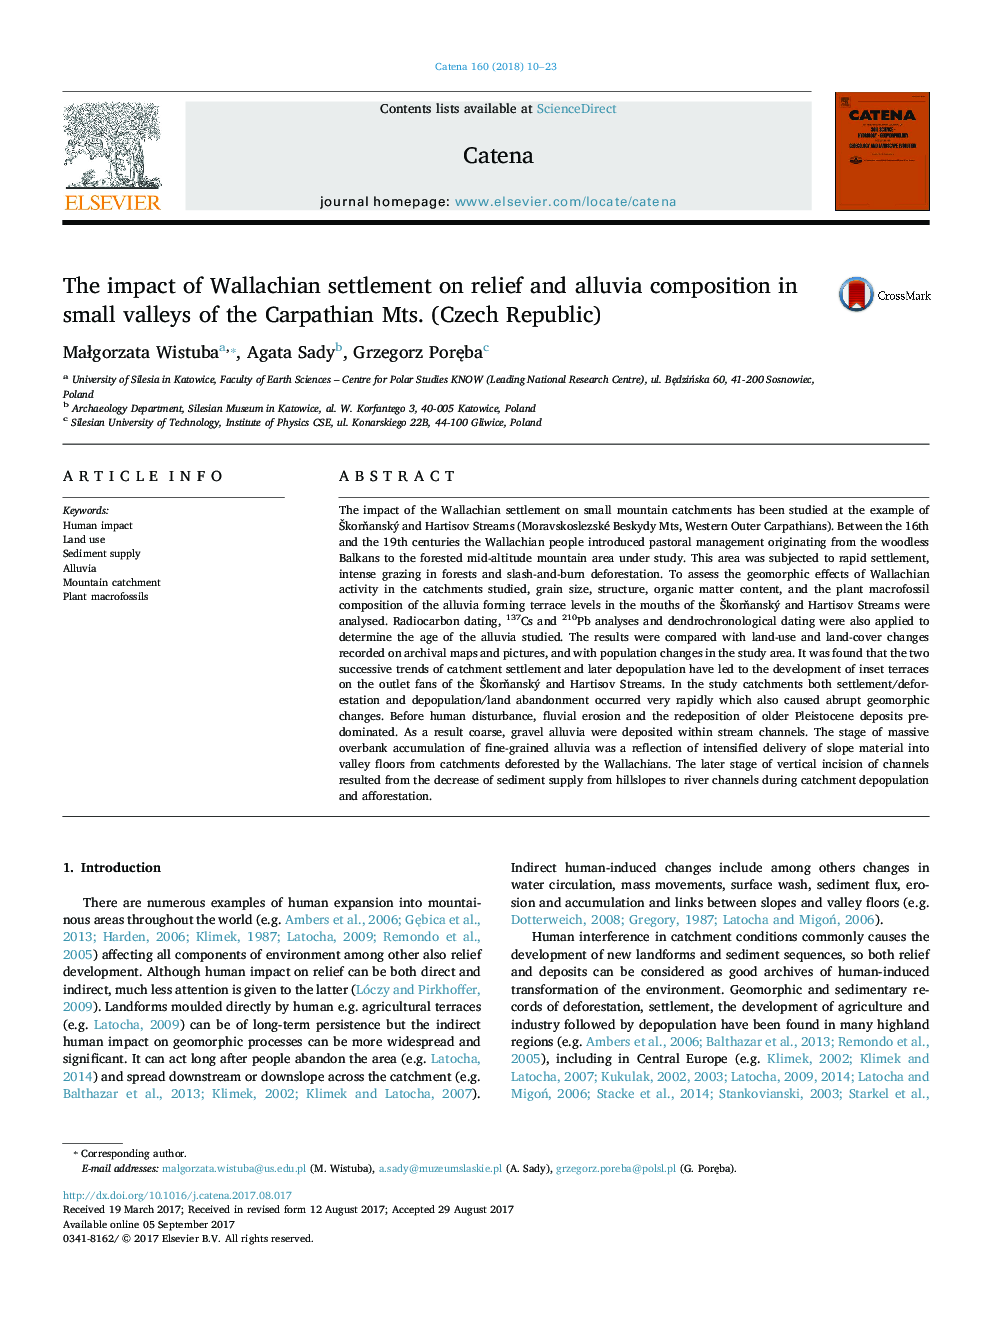 The impact of Wallachian settlement on relief and alluvia composition in small valleys of the Carpathian Mts. (Czech Republic)